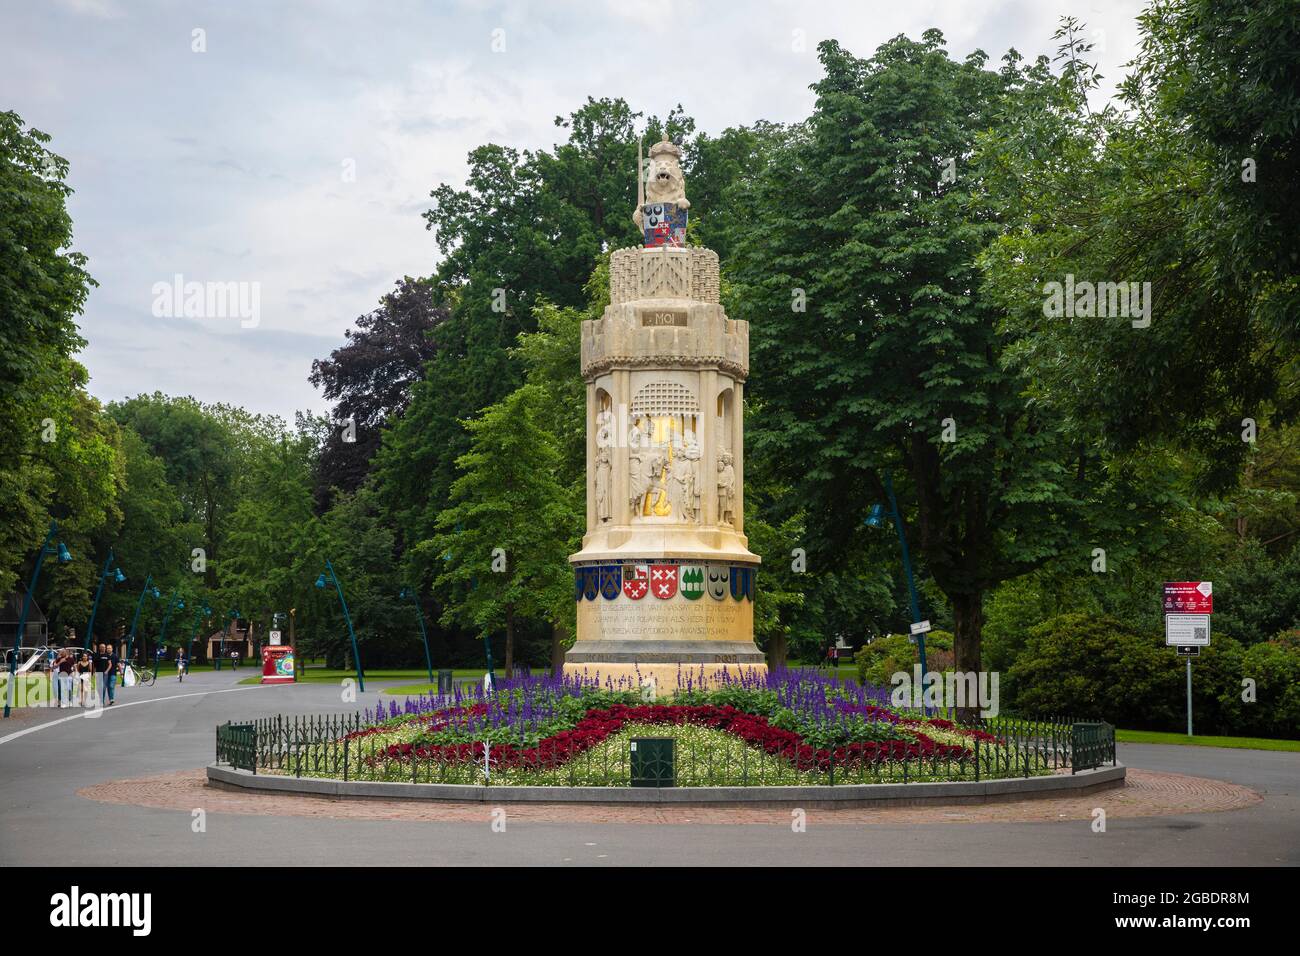 Breda, The Netherlands June 28th 2021. Baroniemonument (1905) in Park Valkenberg surrounded by trees, flowers and greenery. It remembers the 500 years Stock Photo